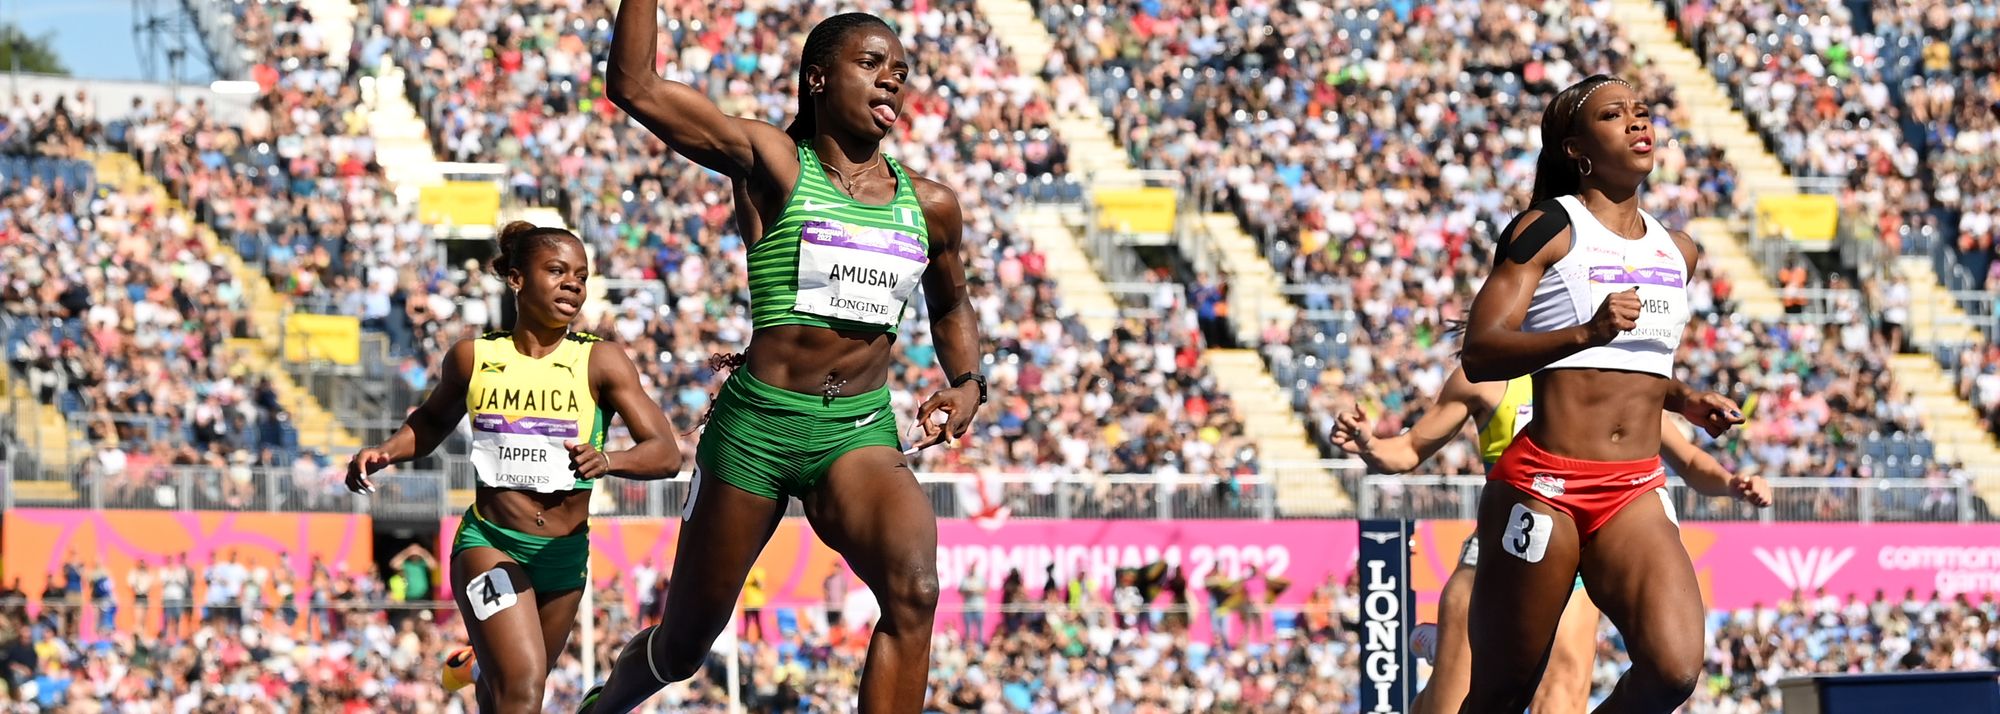 Amusan's 12.30 one of several Games record on the final day of athletics action in Birmingham